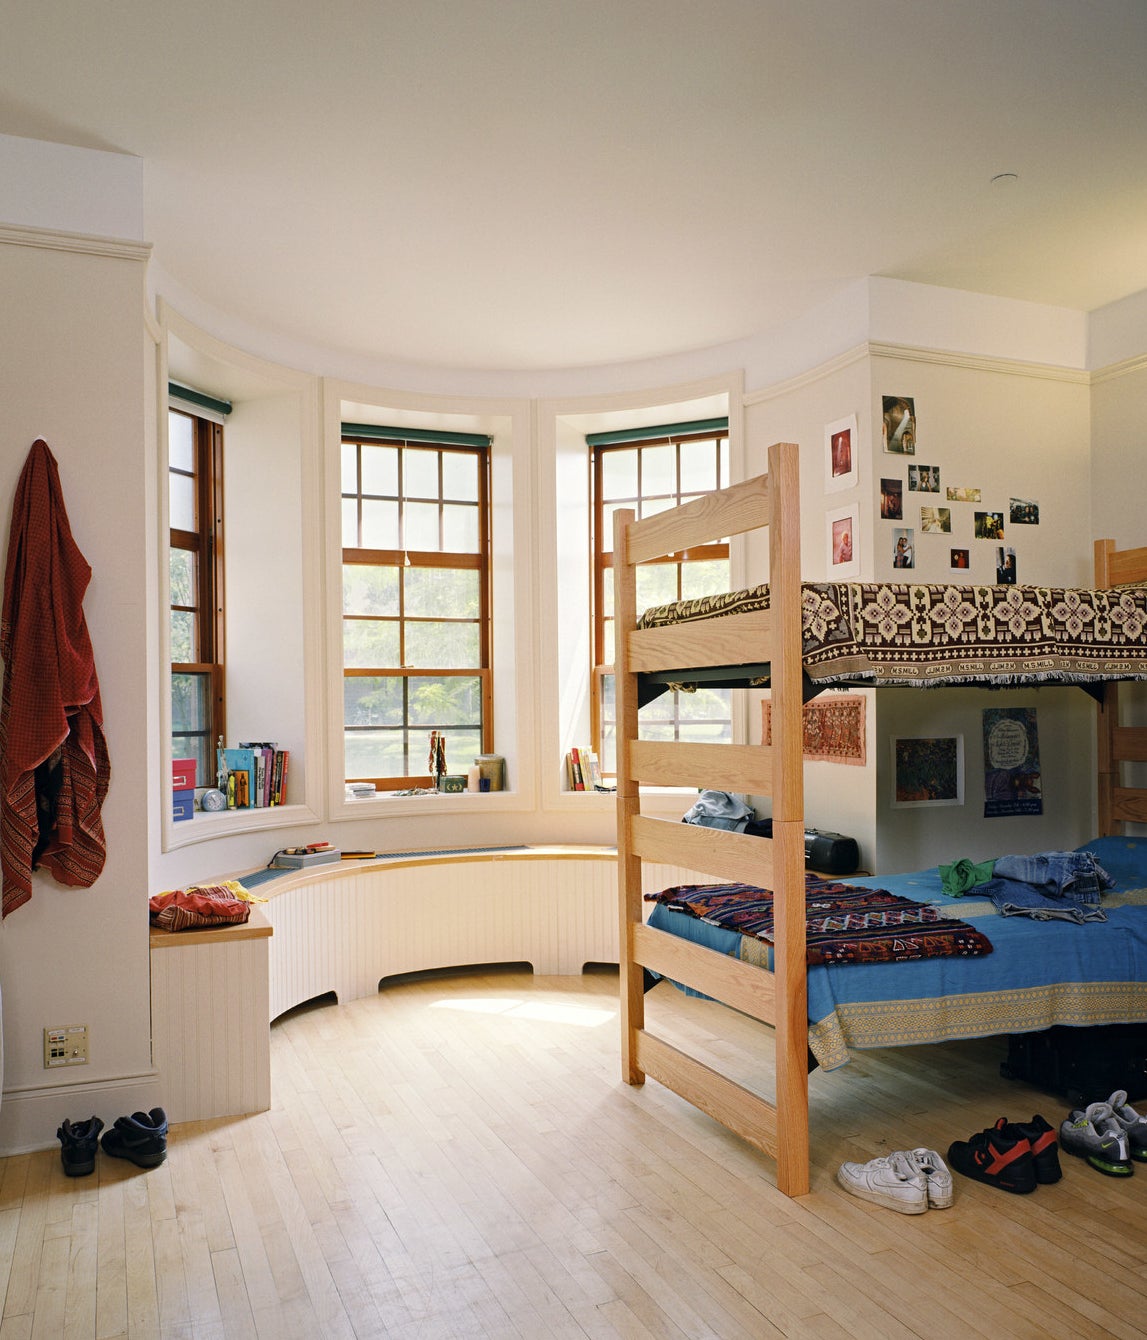 A bunk bed with clothes strewn on top